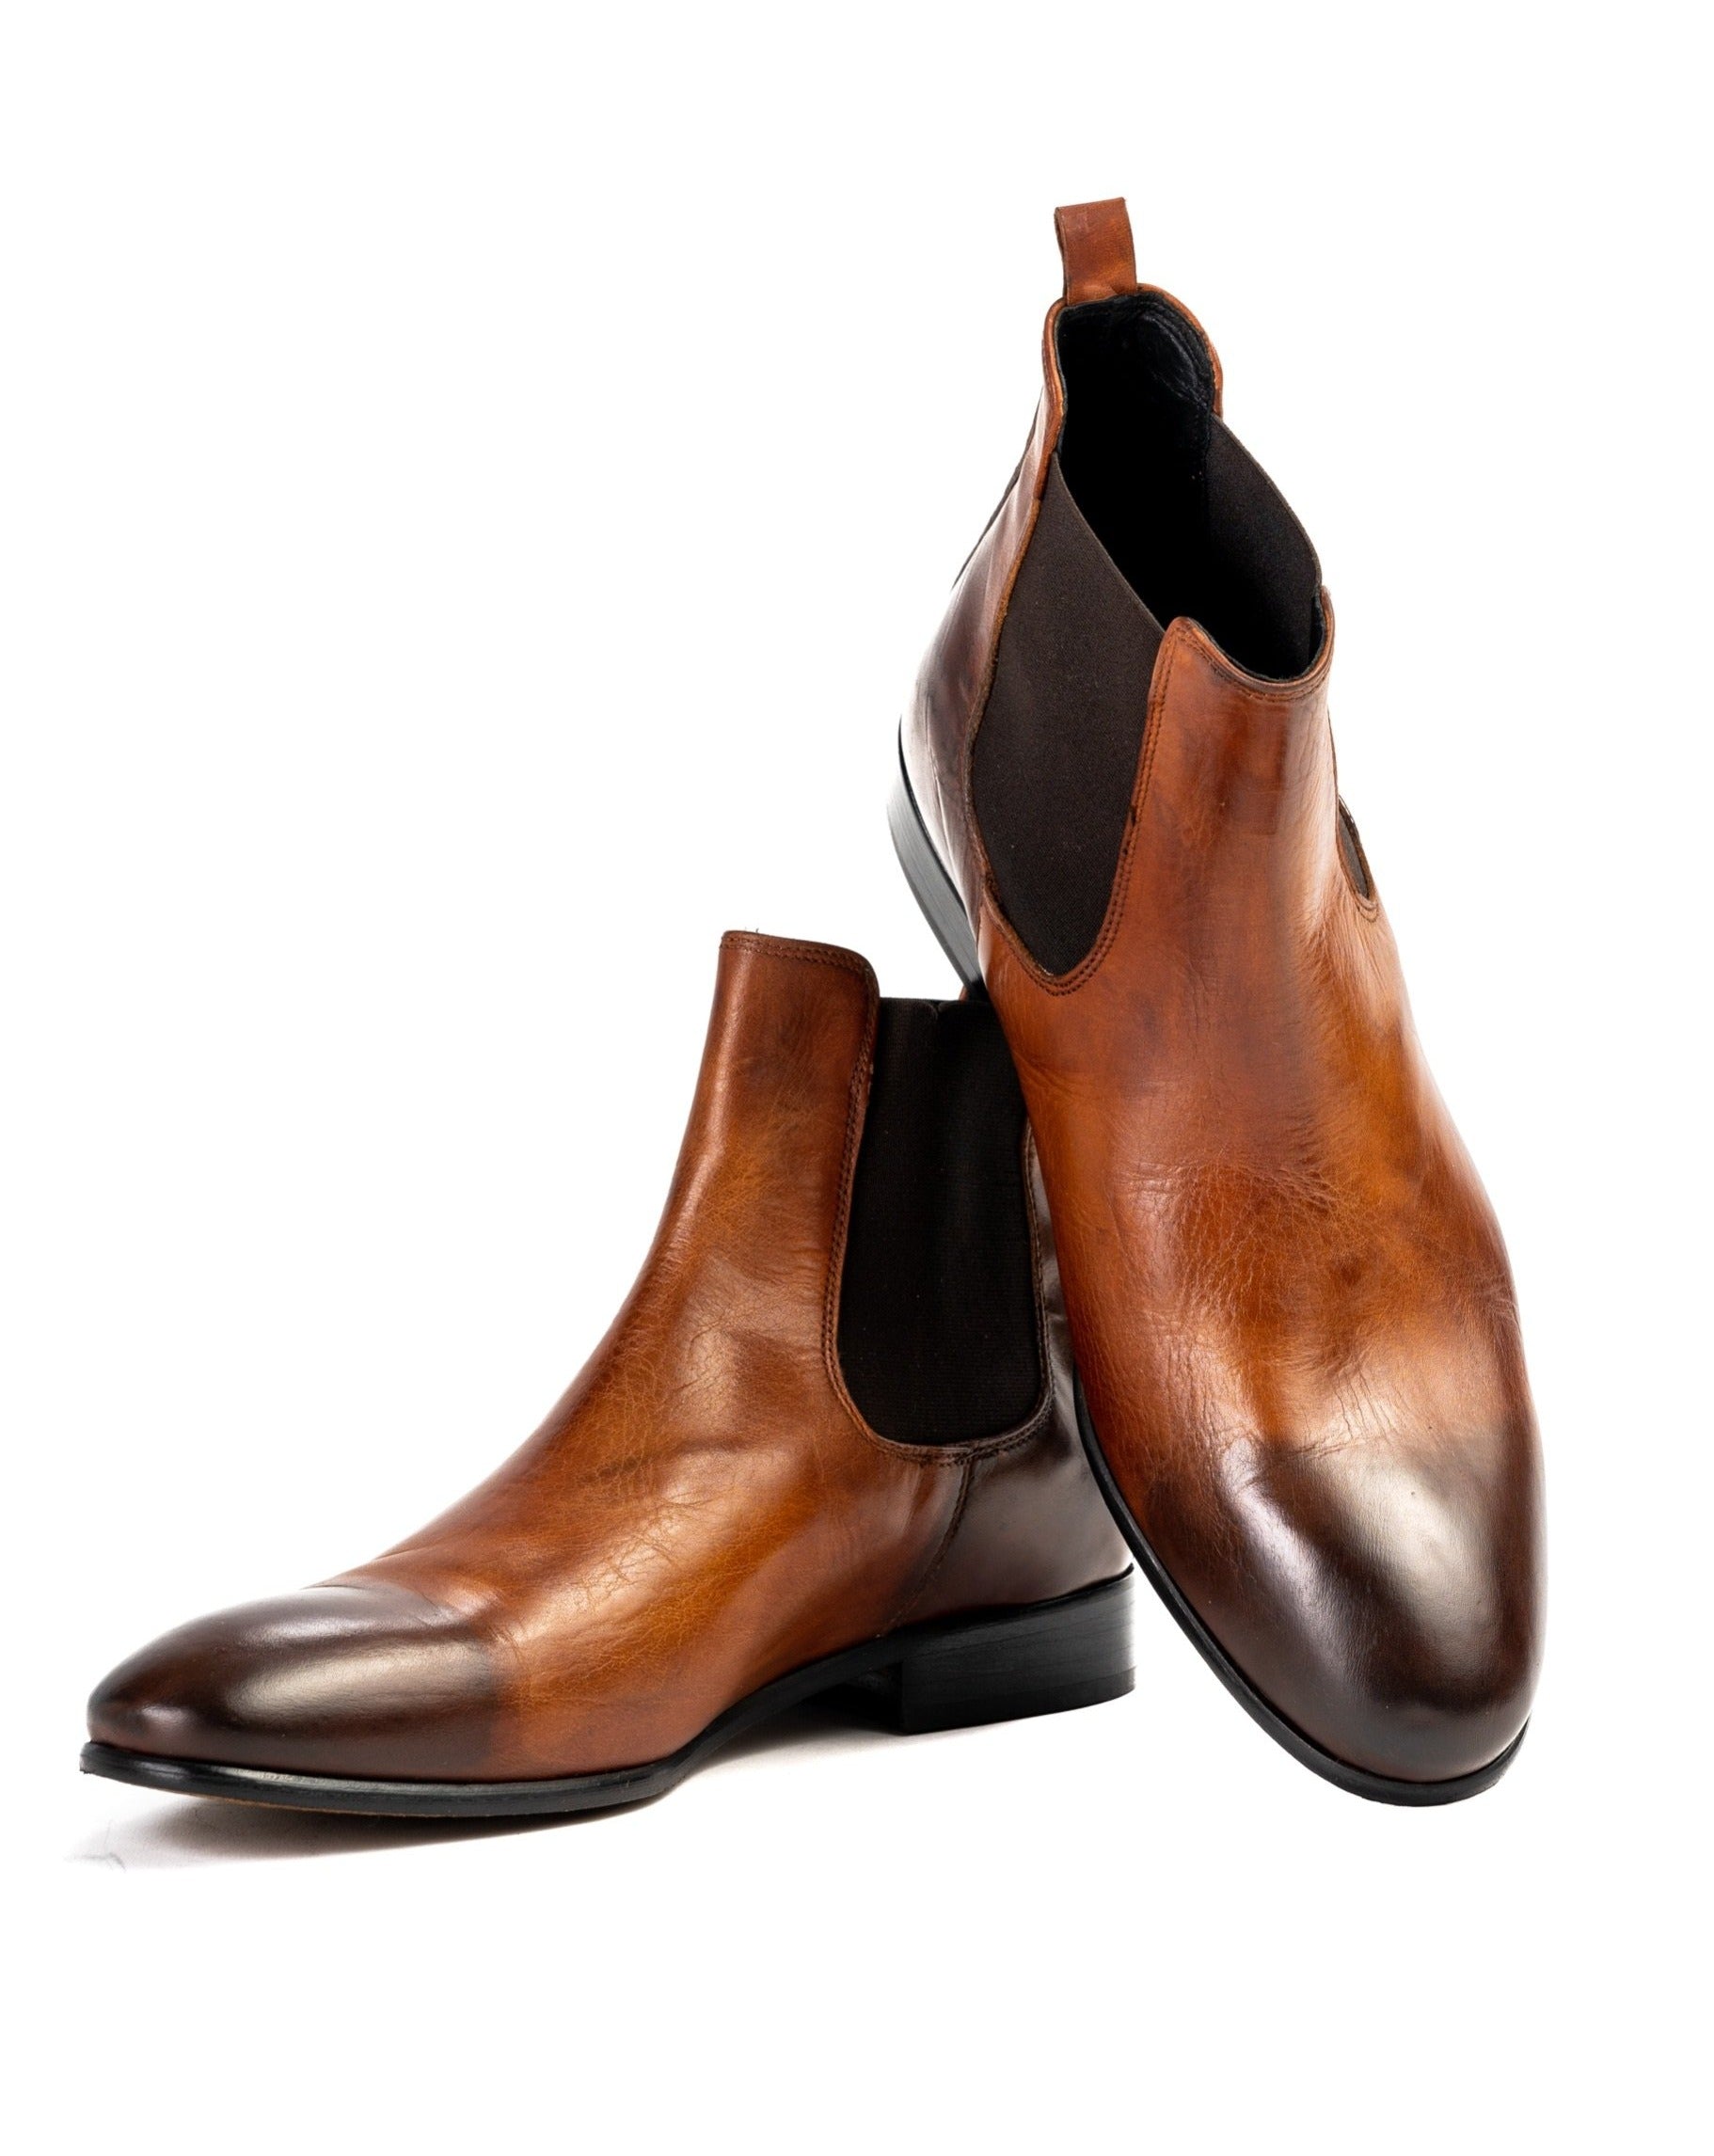 Dre - dirty brown leather chelsea boots